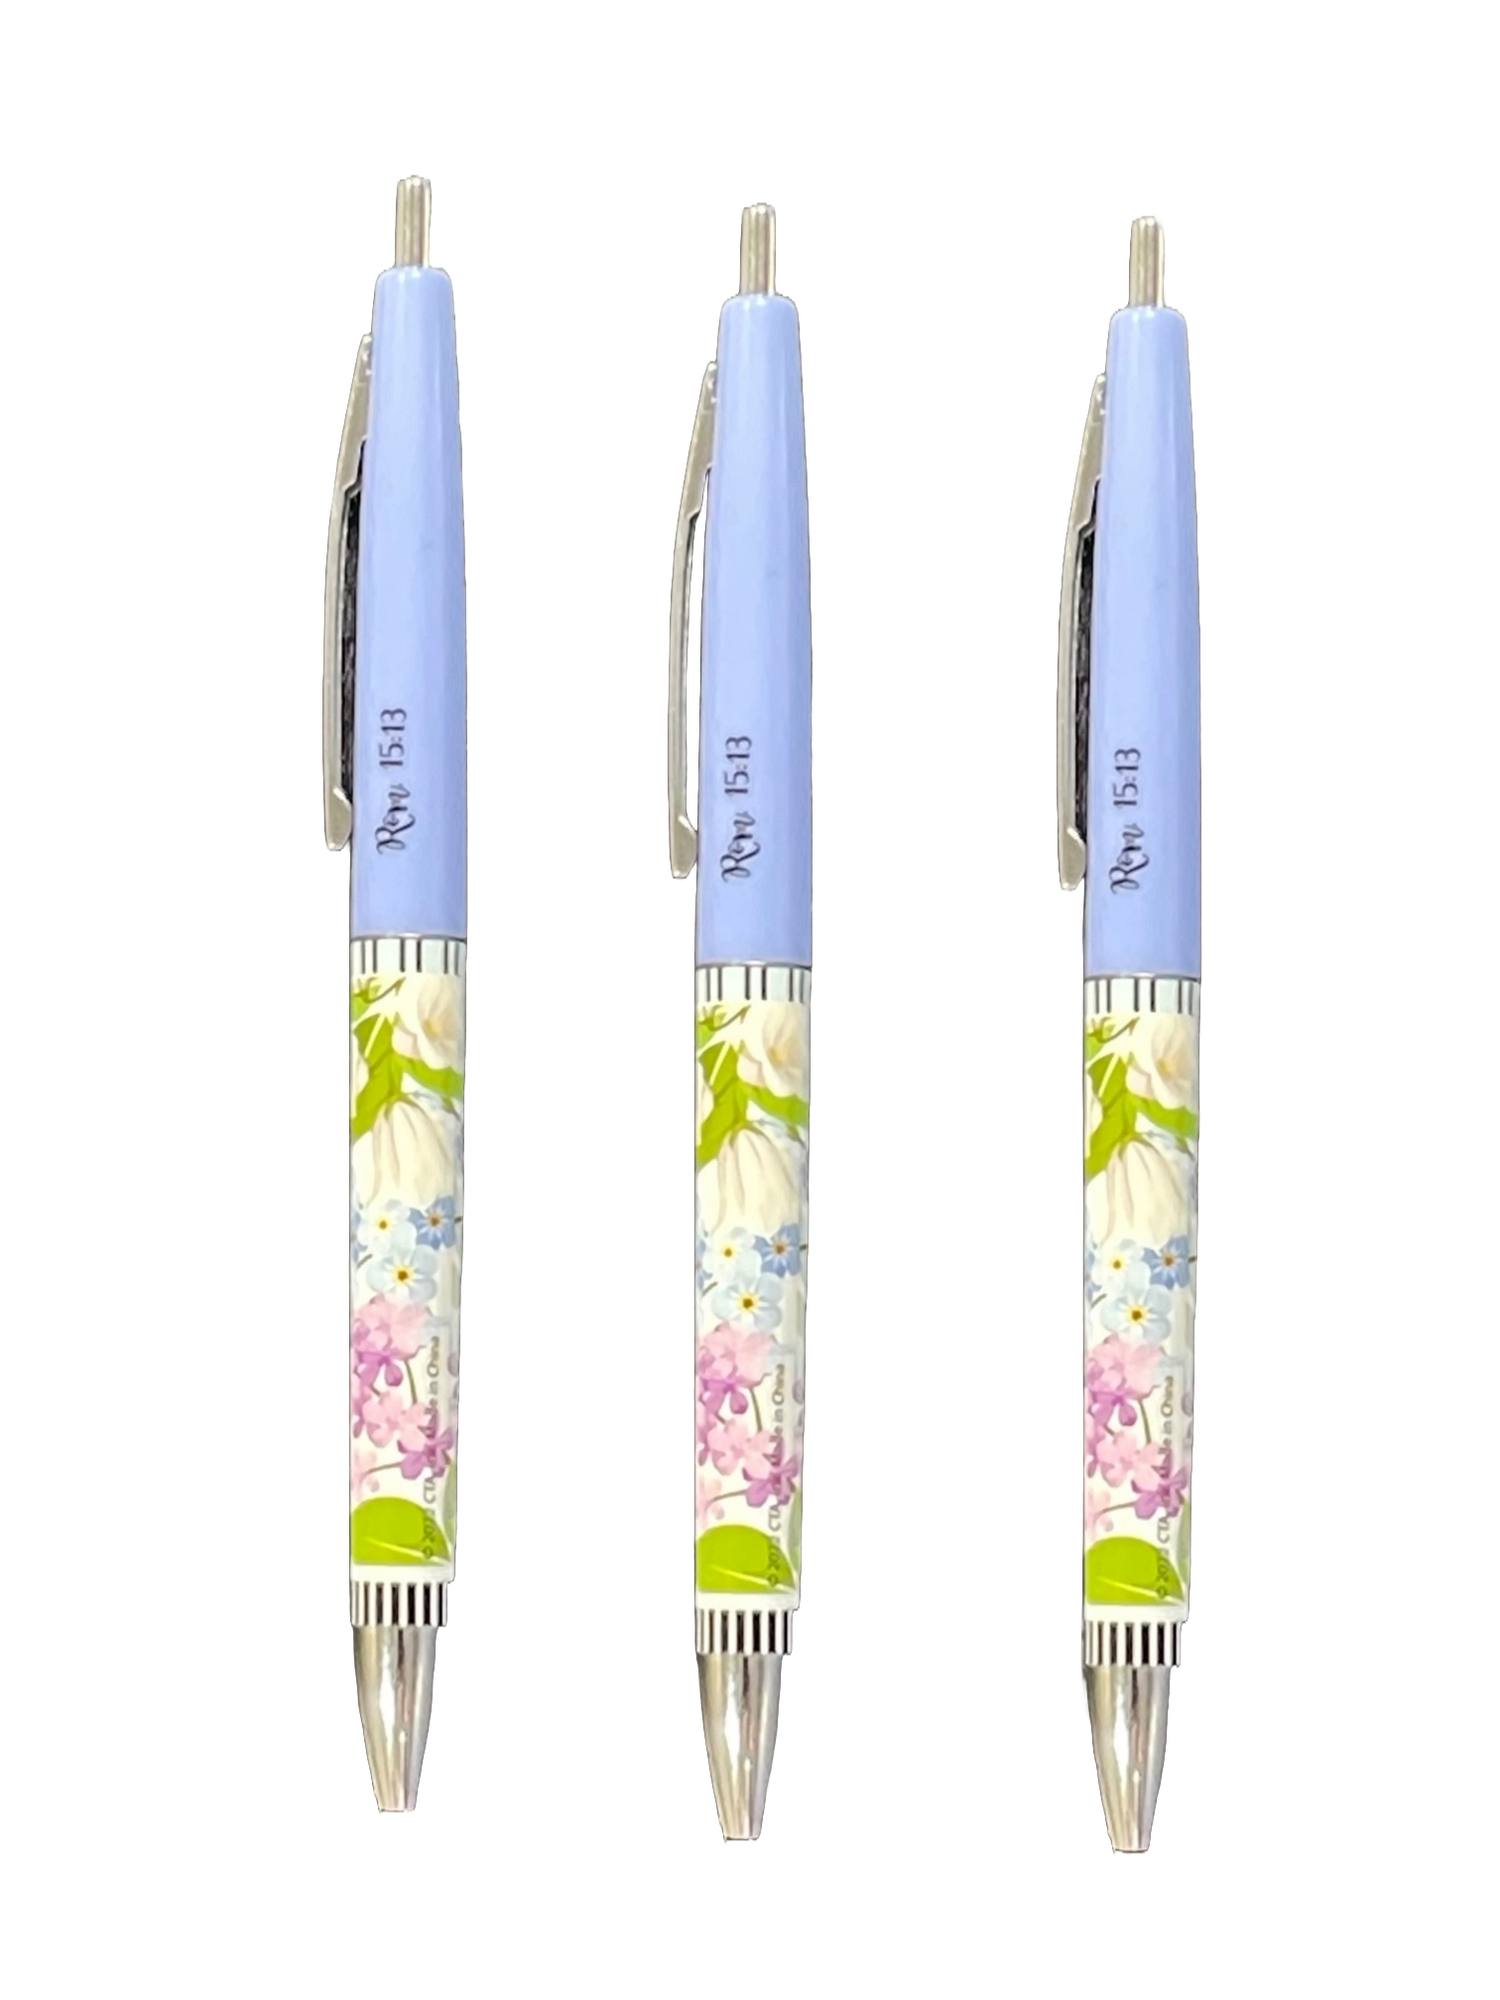 Pastel blue & floral print design on 3 ladies' pens with Bible reference